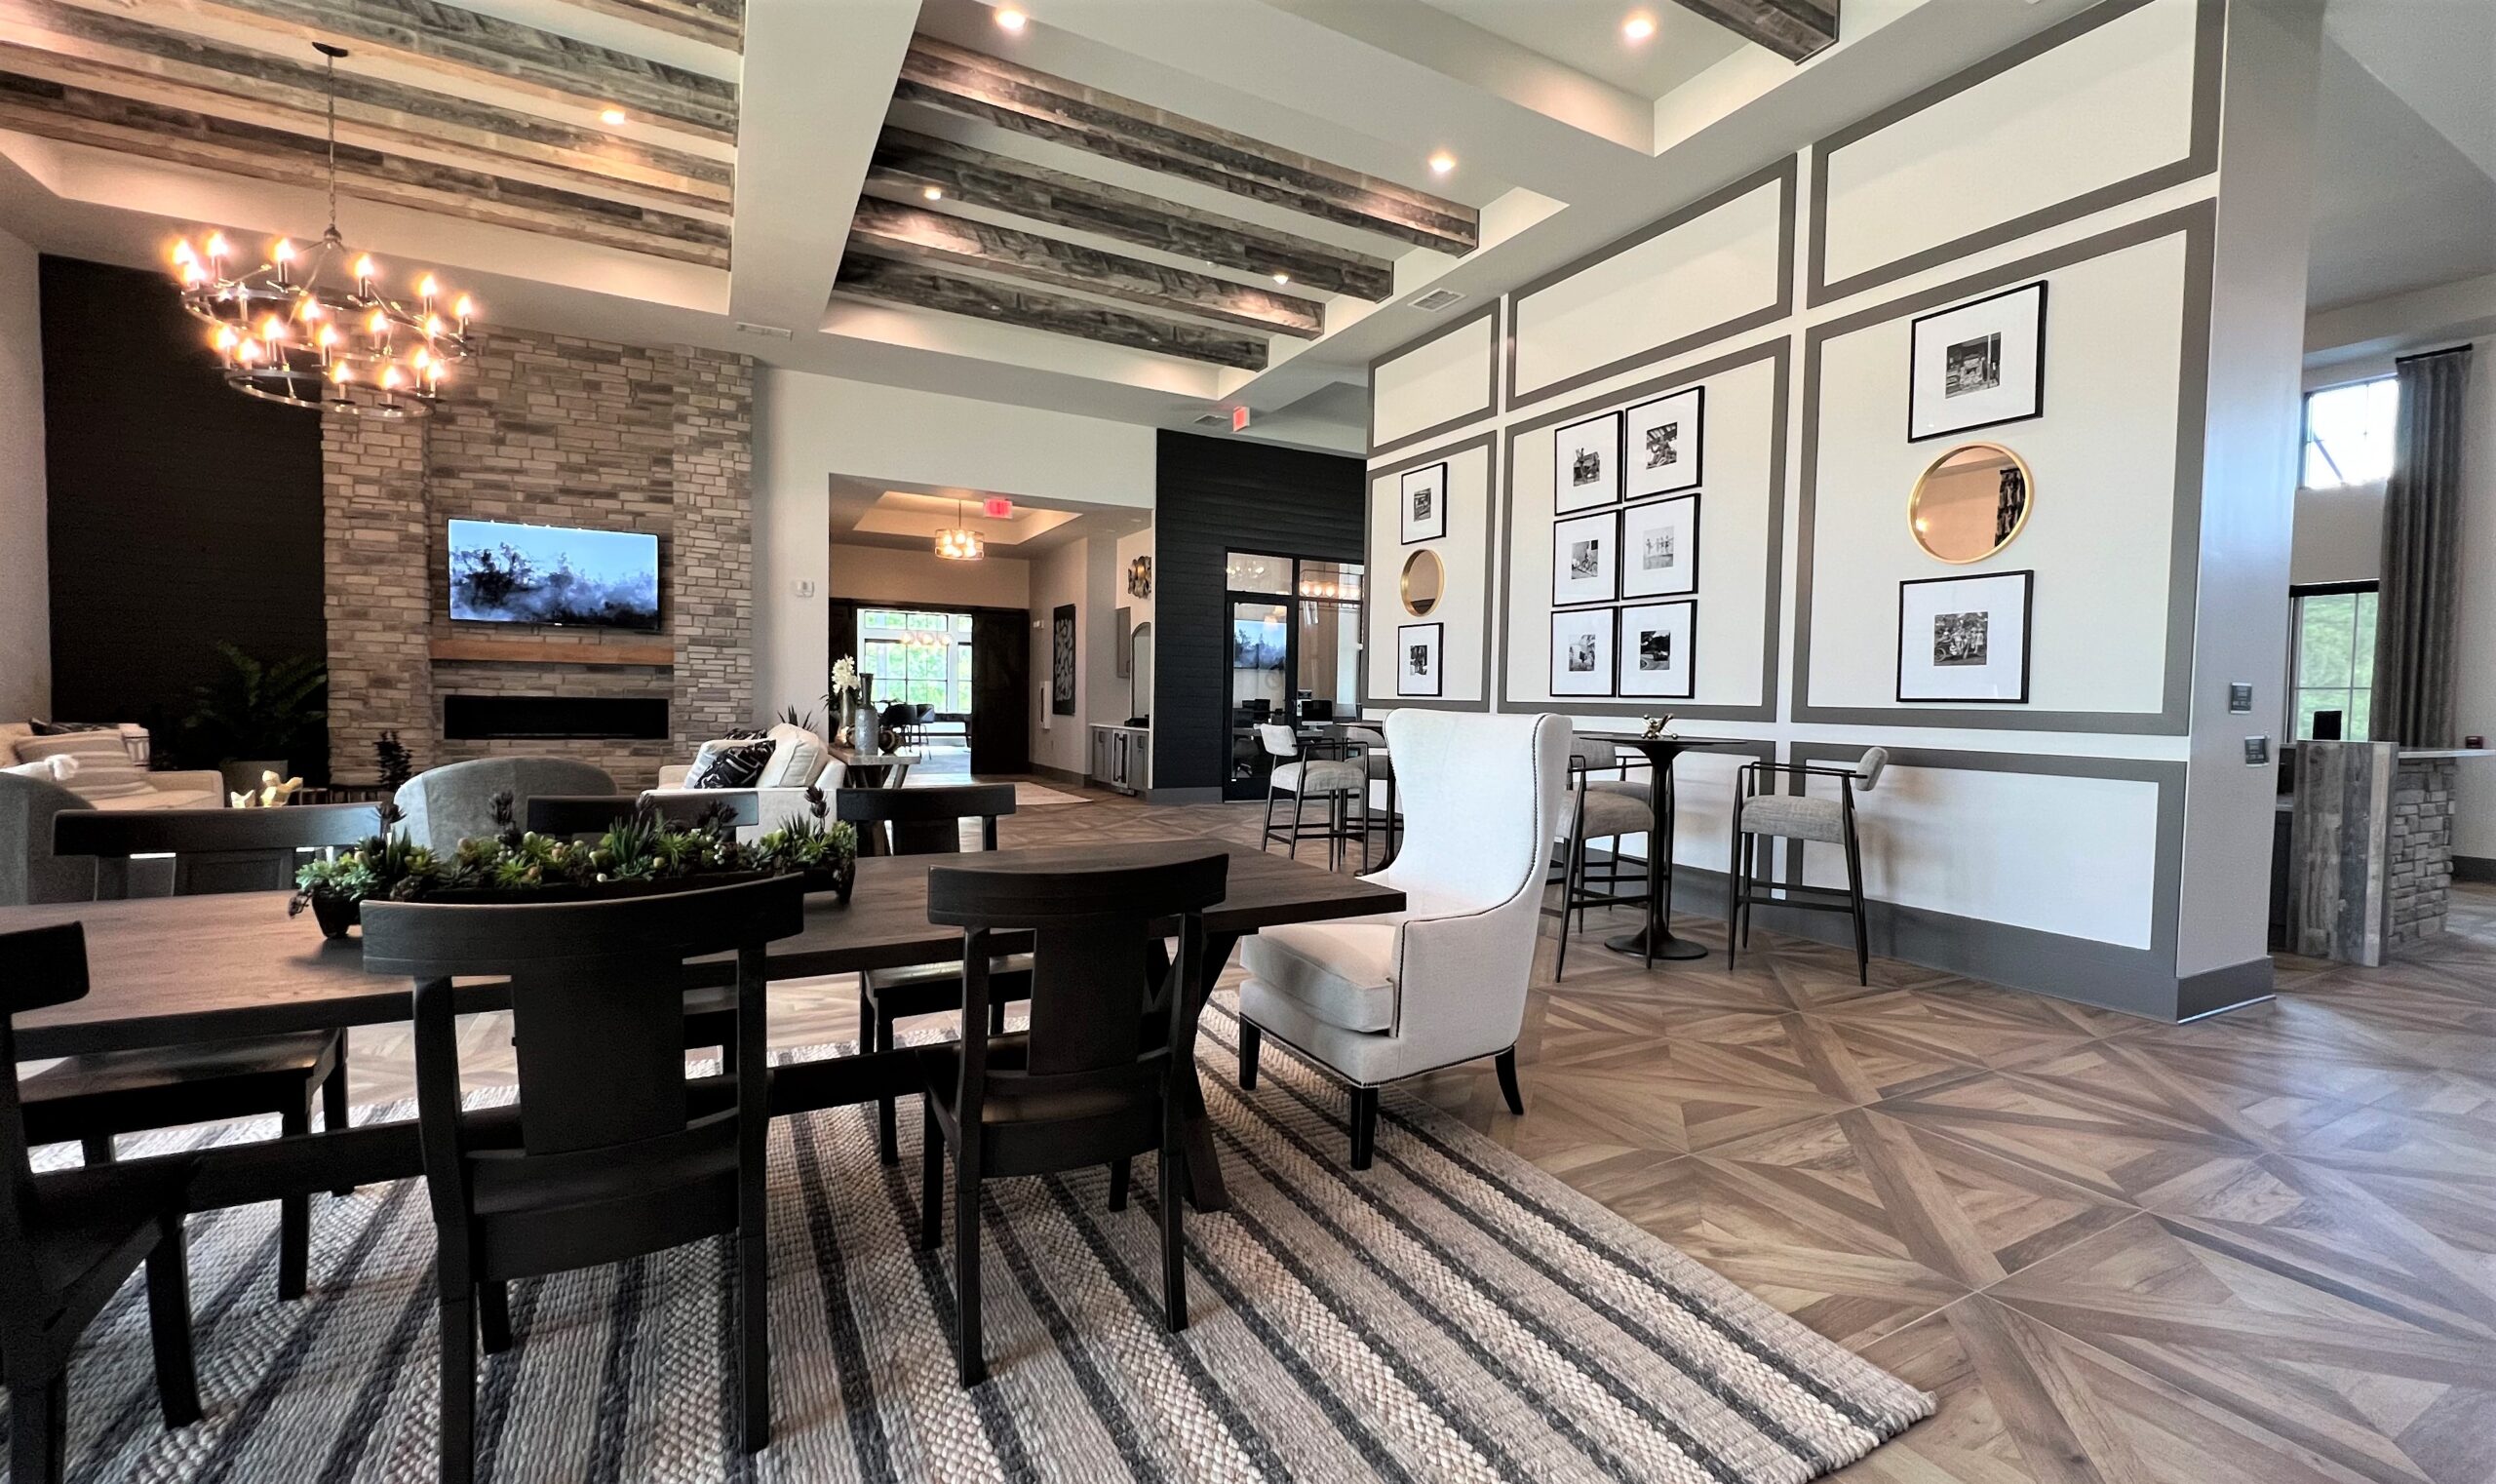 The Addison Eighty50 clubhouse and amenities